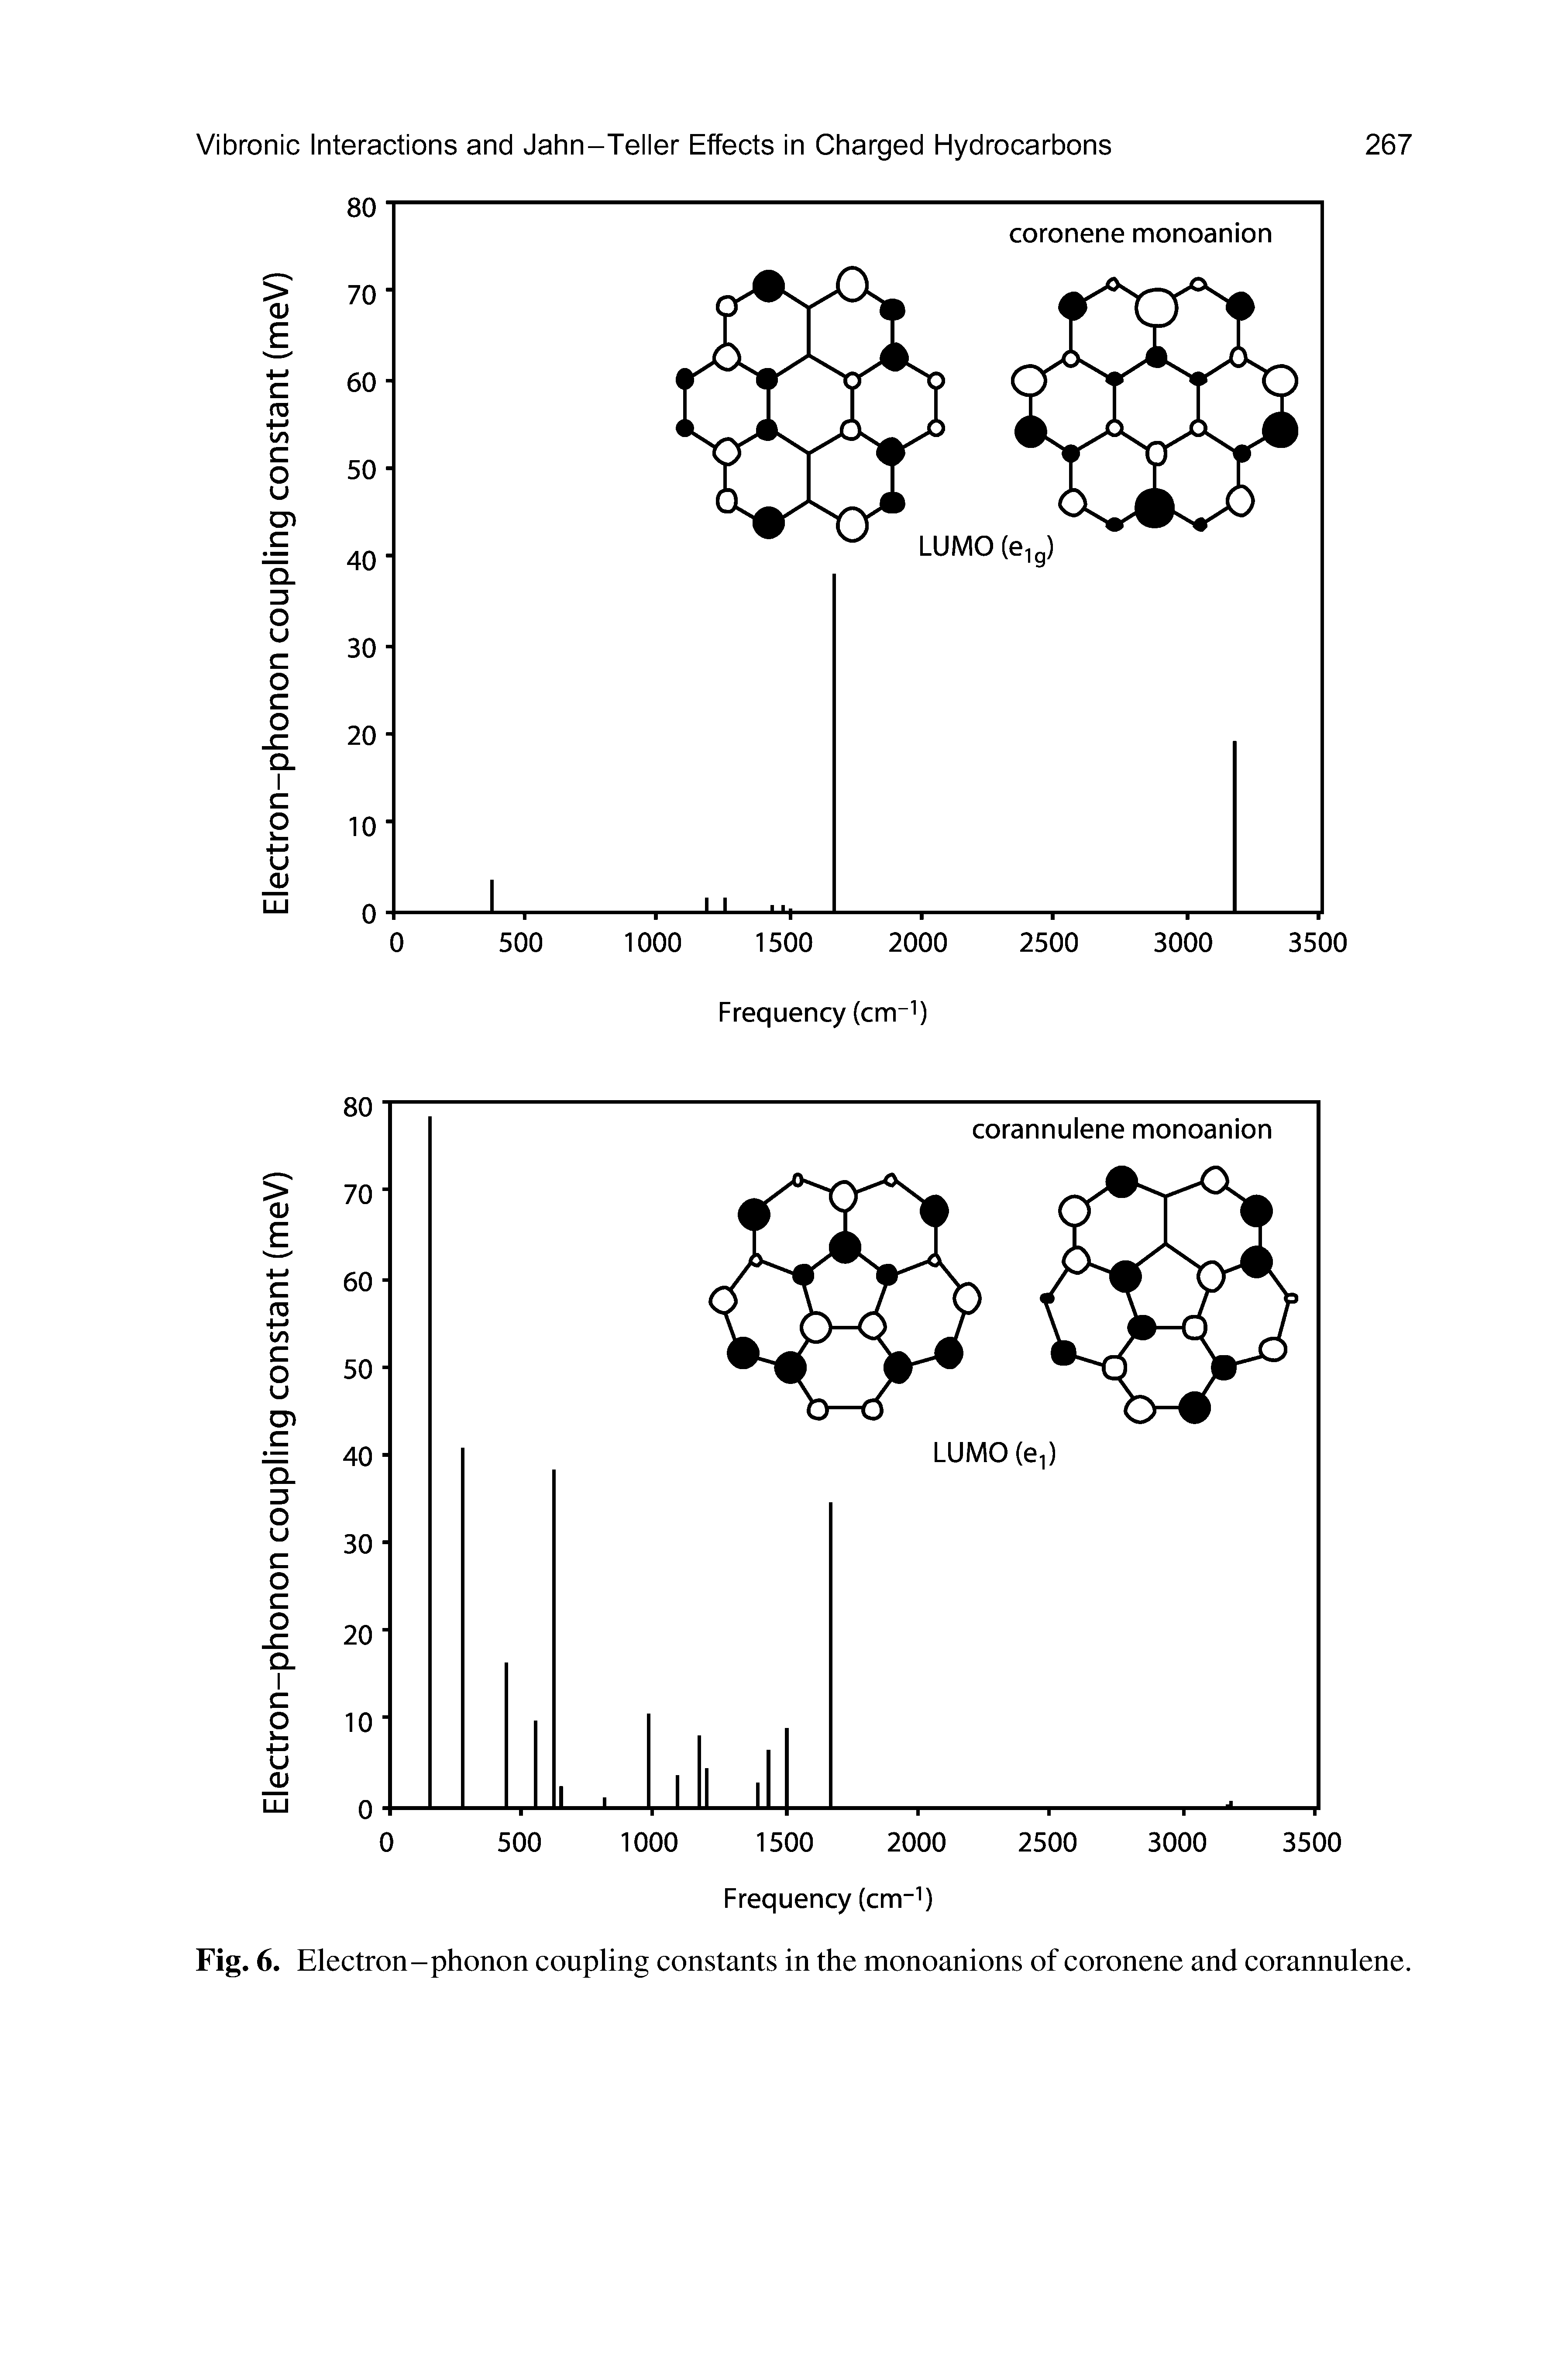 Fig. 6. Electron-phonon coupling constants in the monoanions of coronene and corannulene.